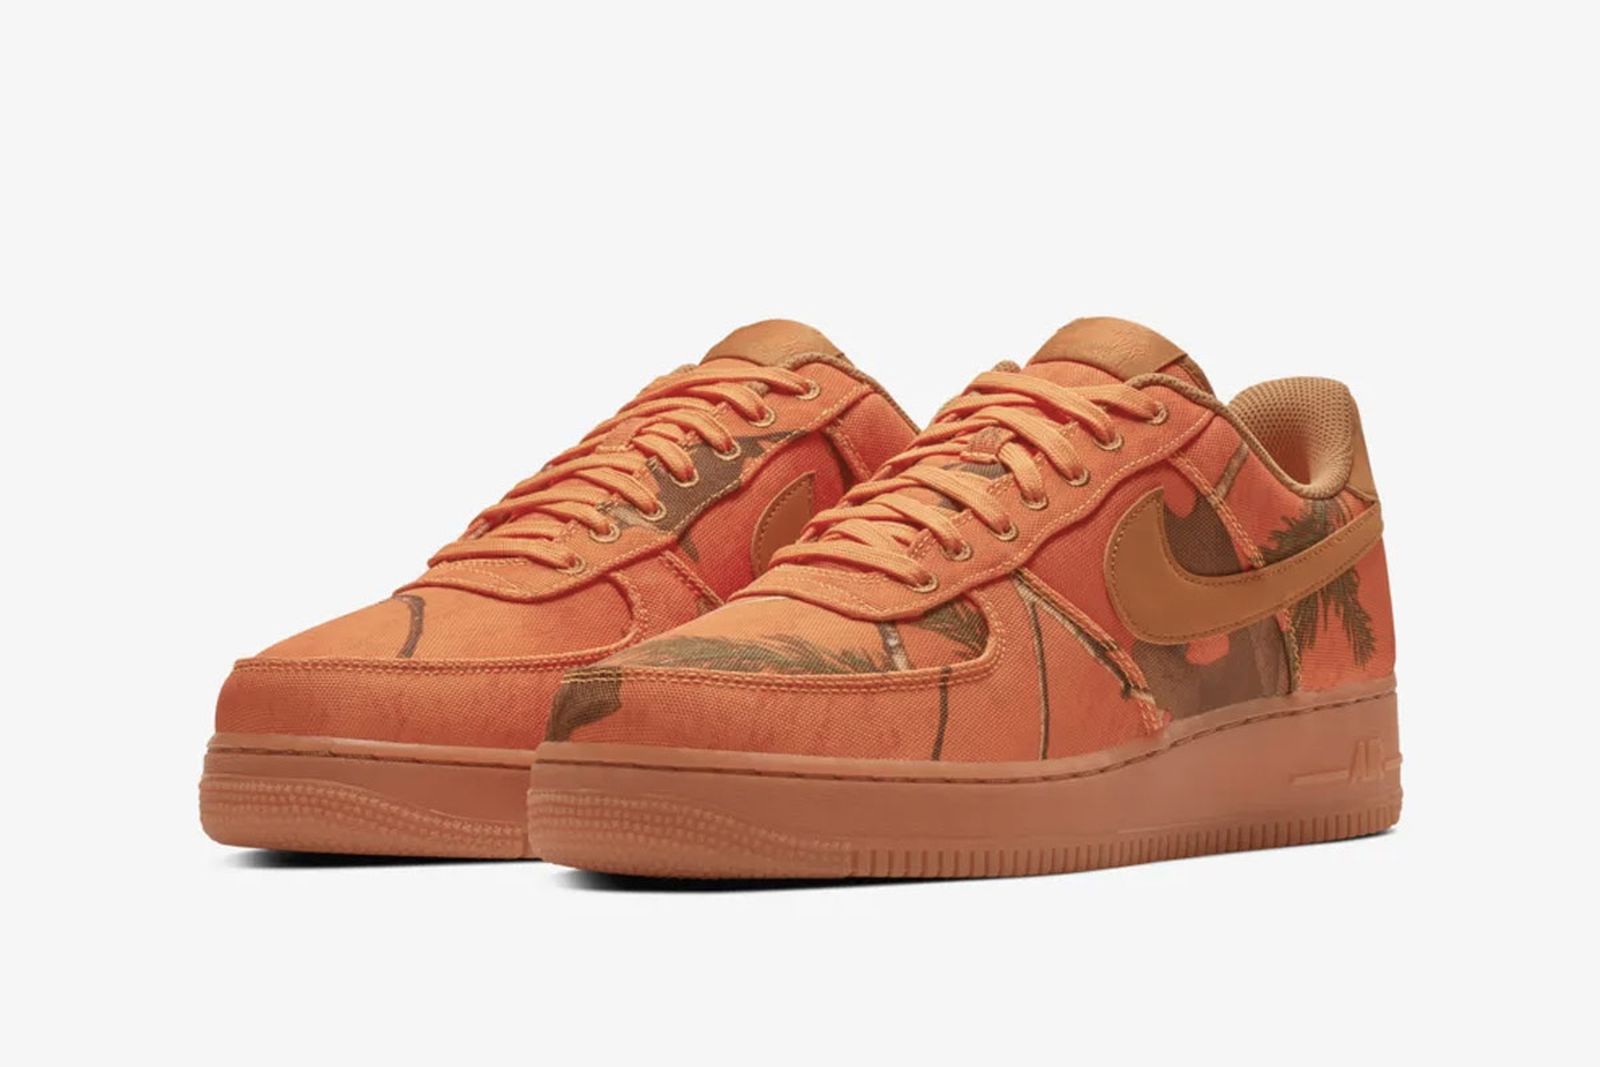 Nike Air Force 1 Realtree Camo Pack: Official Info